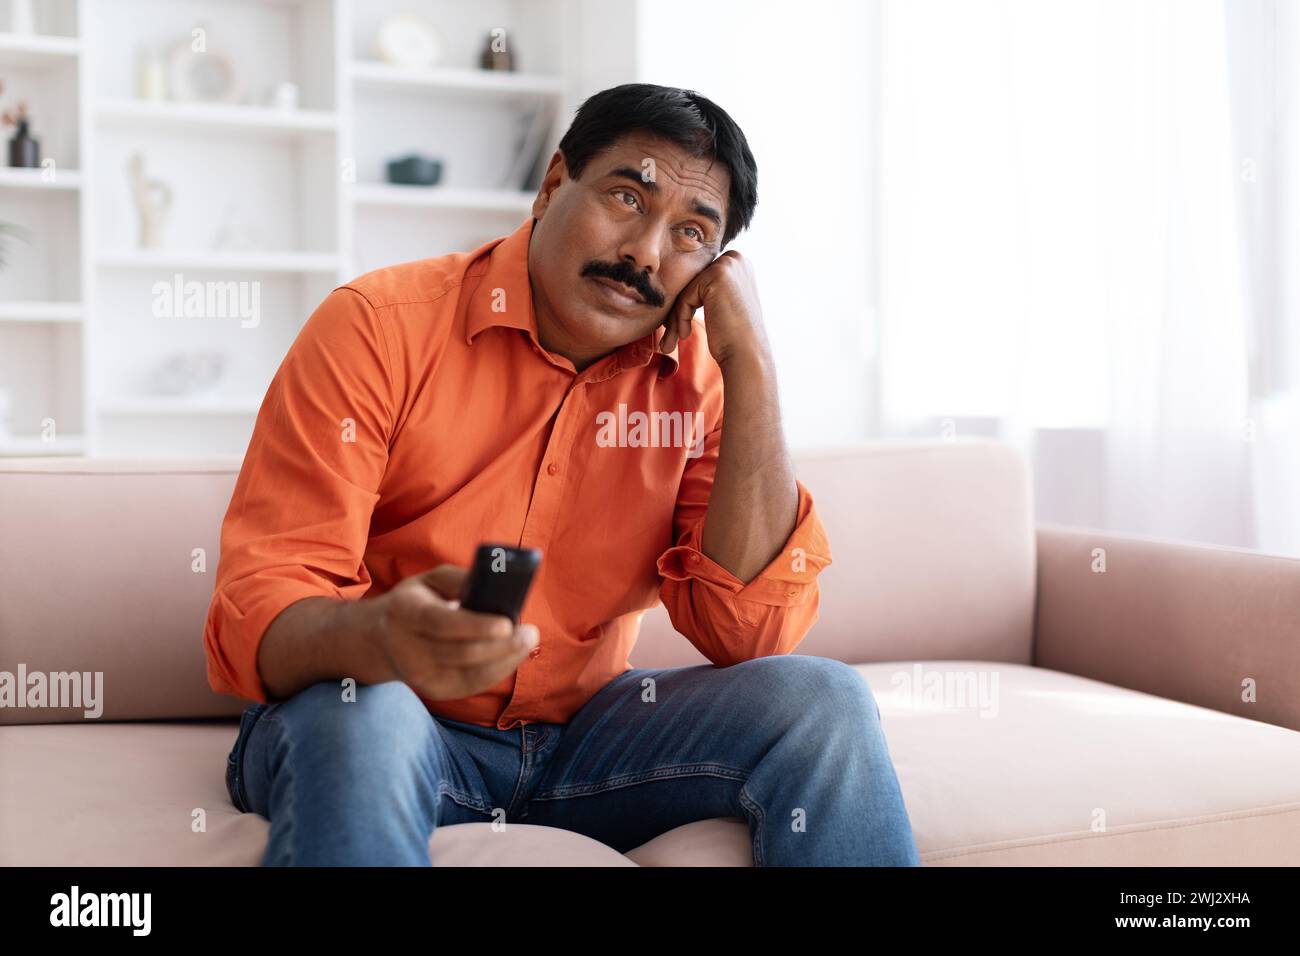 Unhappy mature eastern man sitting on couch, holding remote Stock Photo